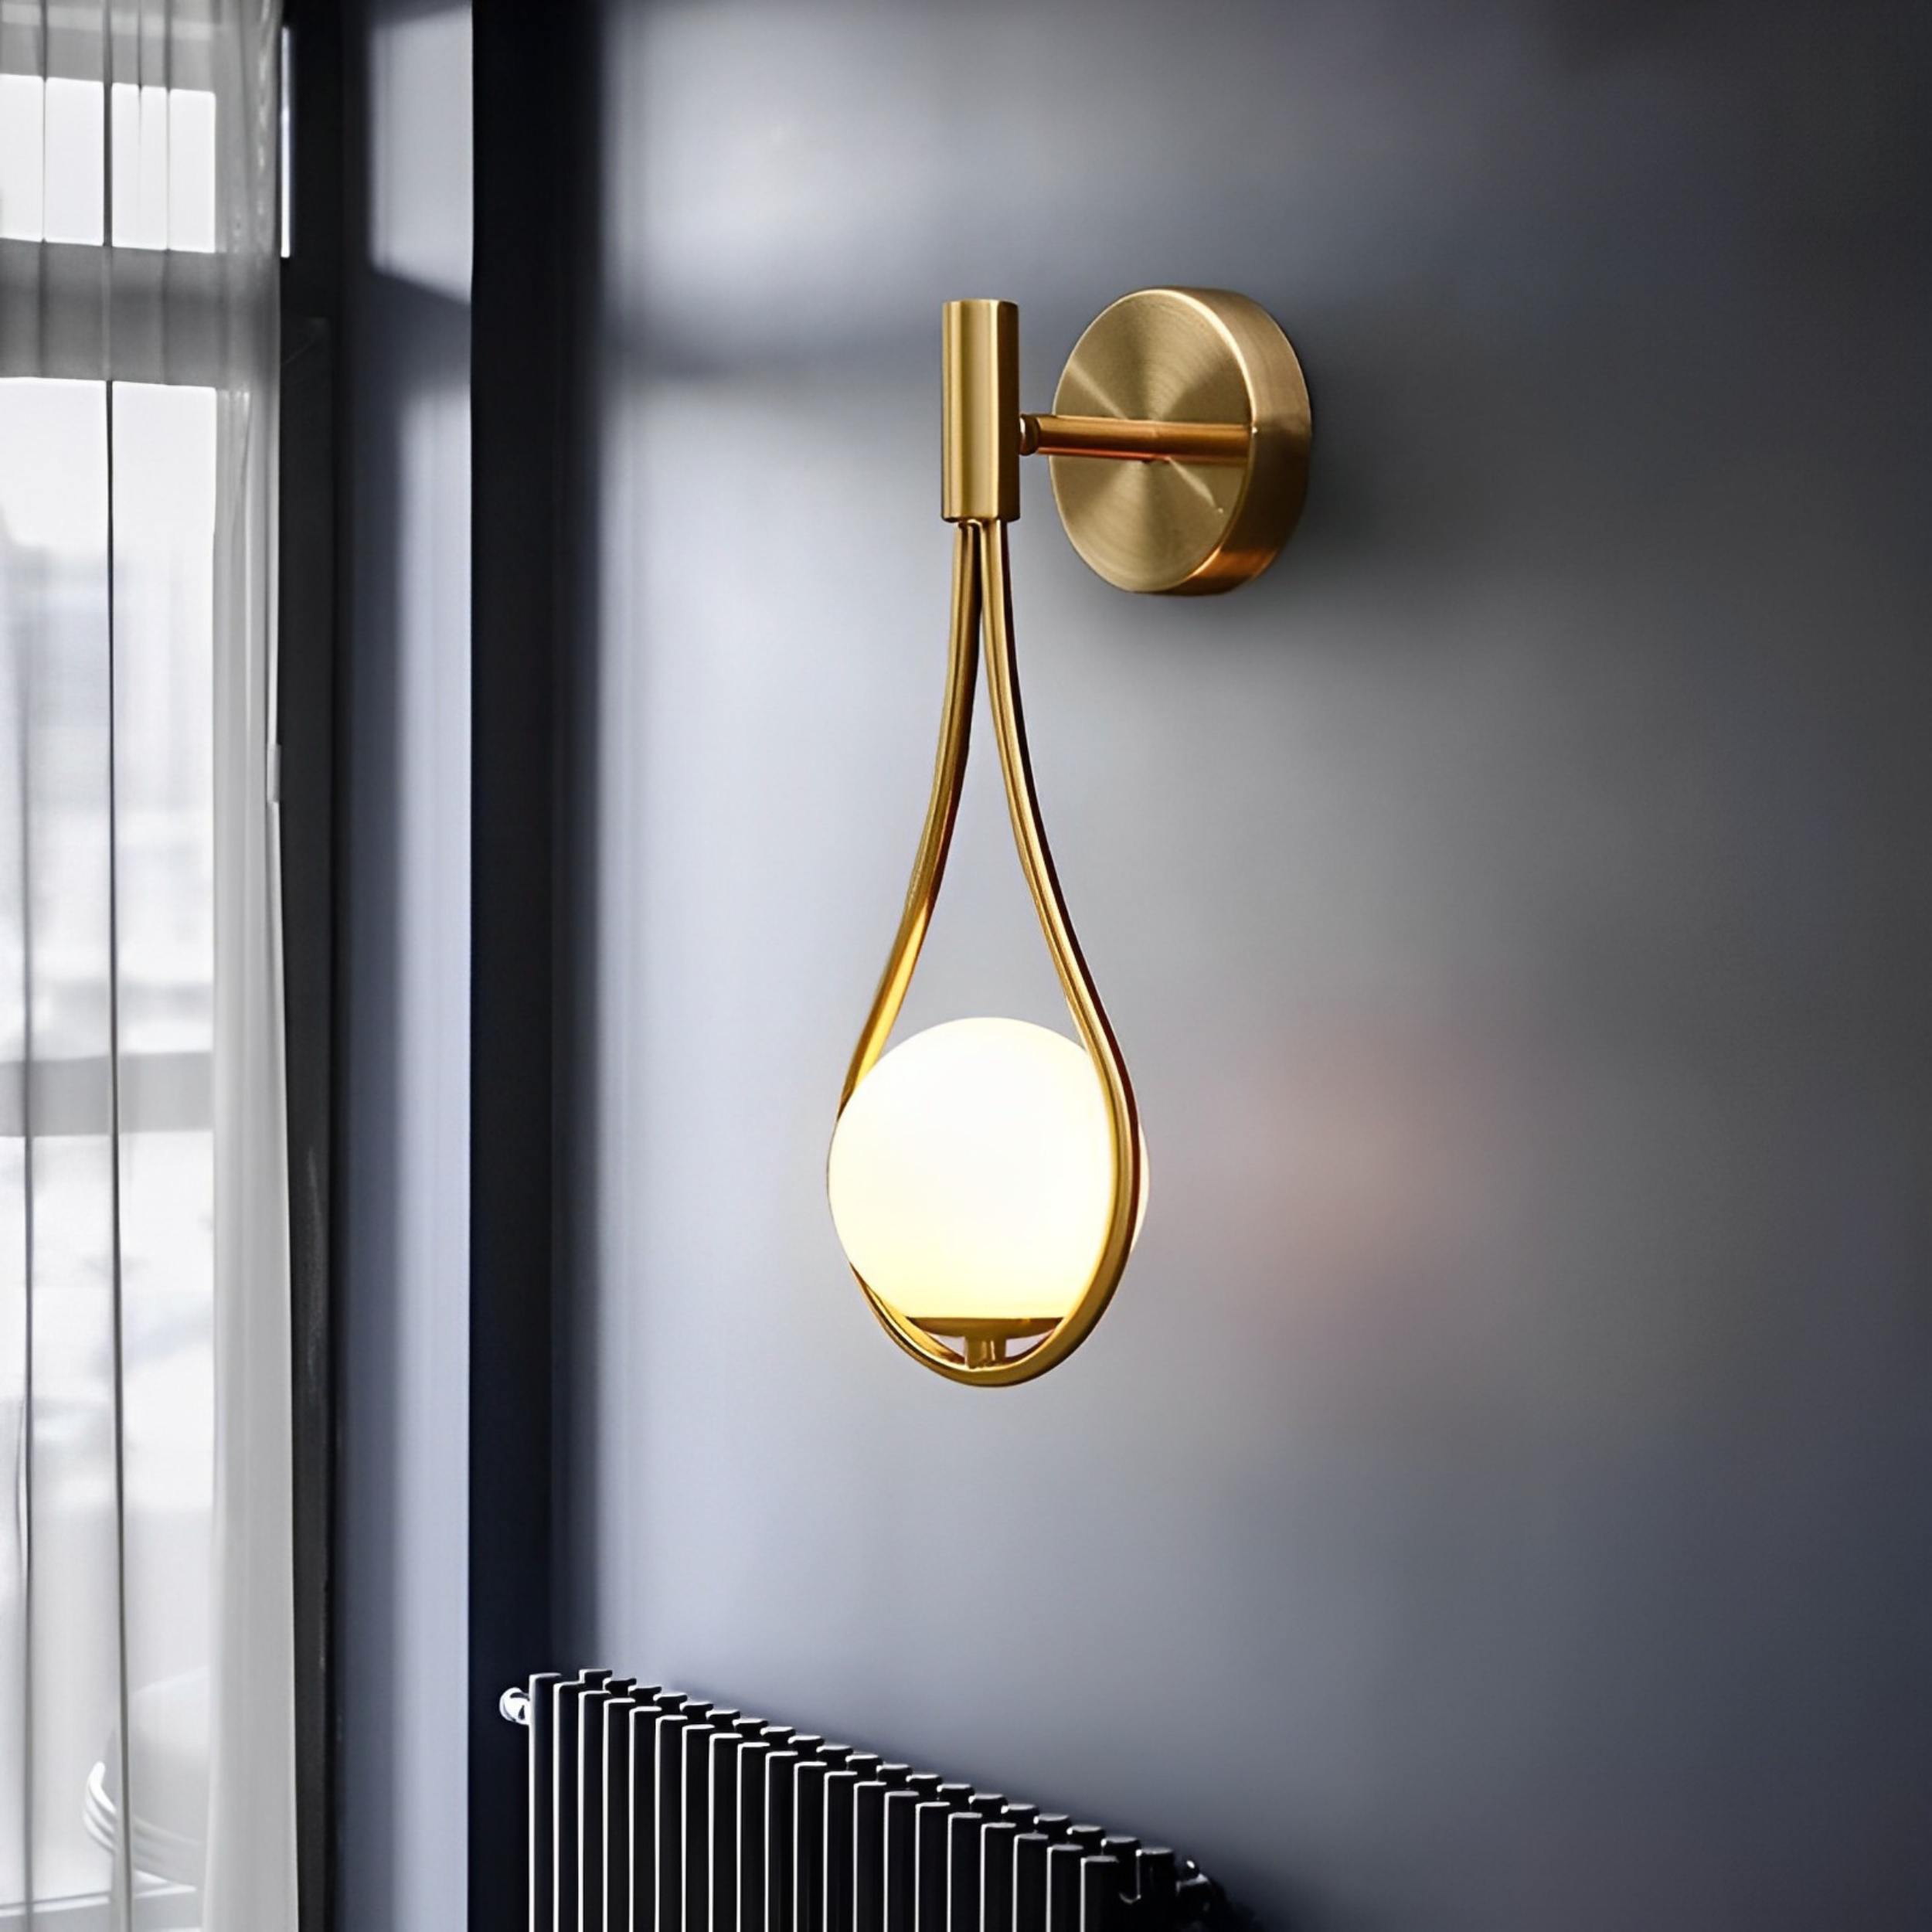 WL-B0035 Nordic Metal Glass Led Wall Sconce Lighting Modern E14 Wall Mounted Light Fixture Brass White Lamp Creative Staircase Bedside Lamp, bedroom, Corridor, Hallway (Single Piece)